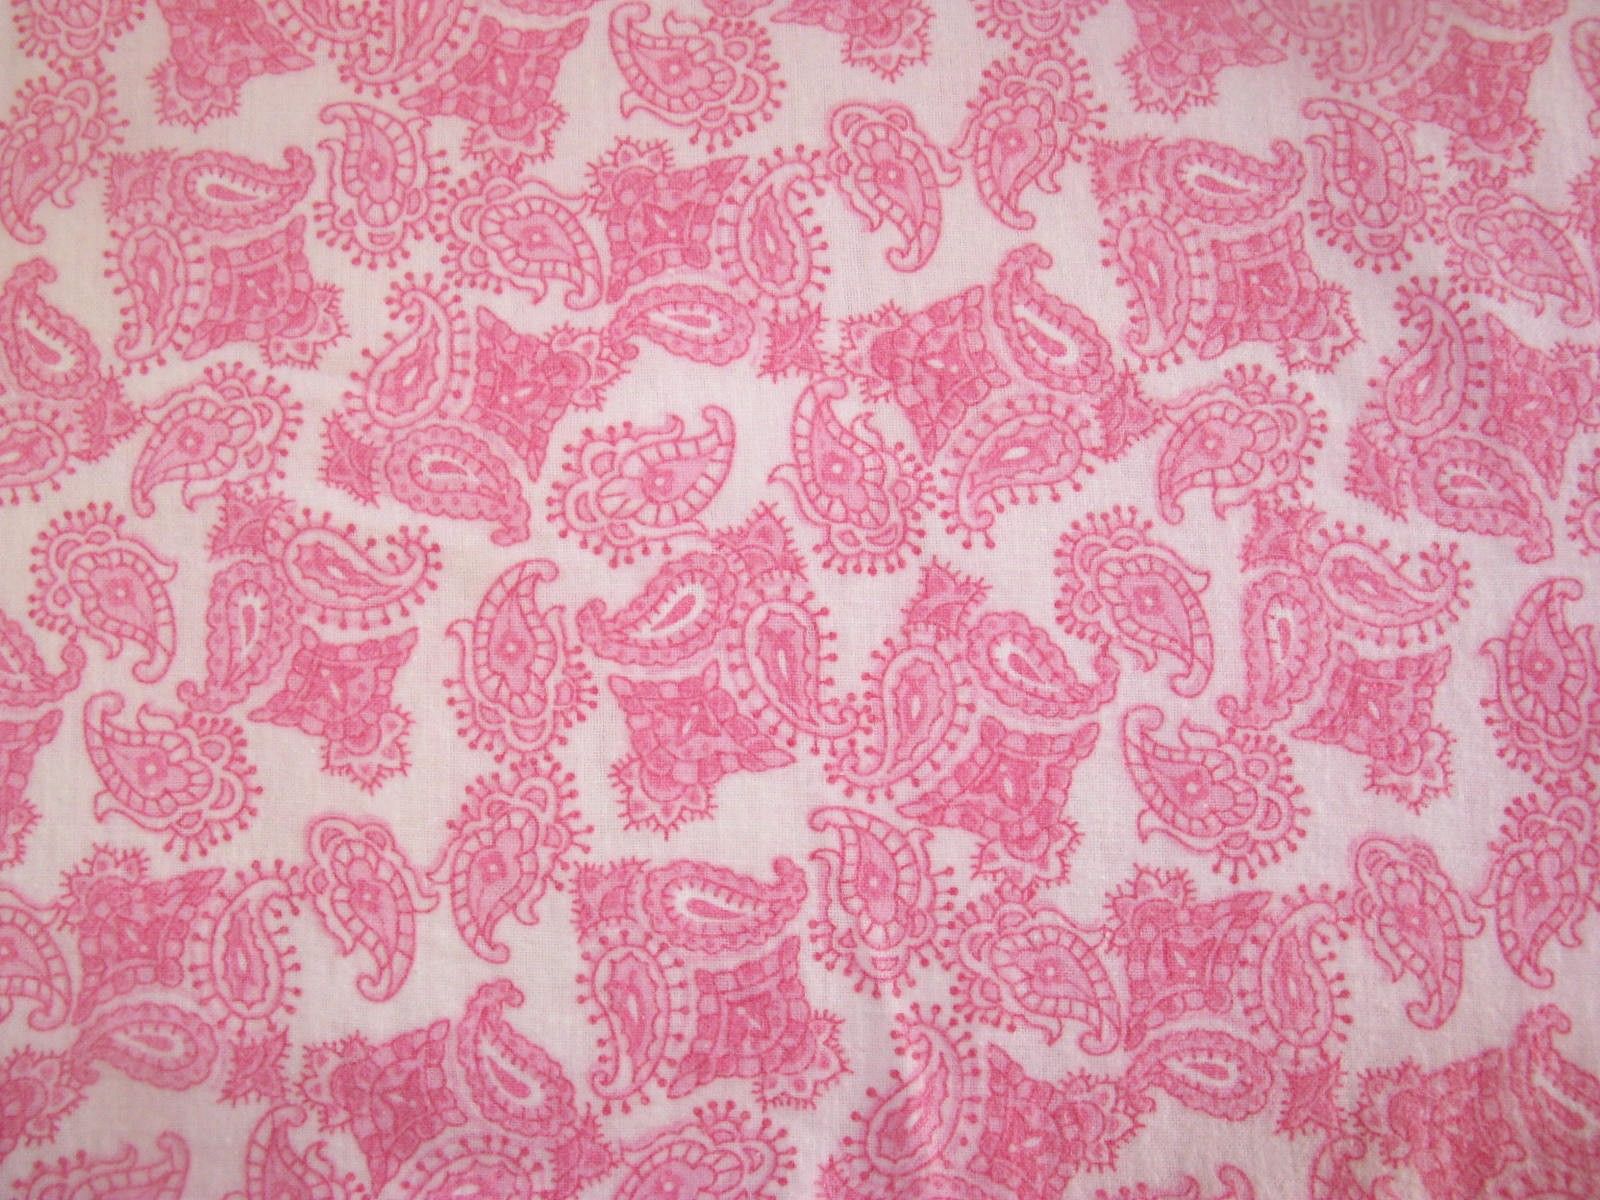 CUSTOM LISTING for DHSAGAL pink paisley flannelette by thriftypyg